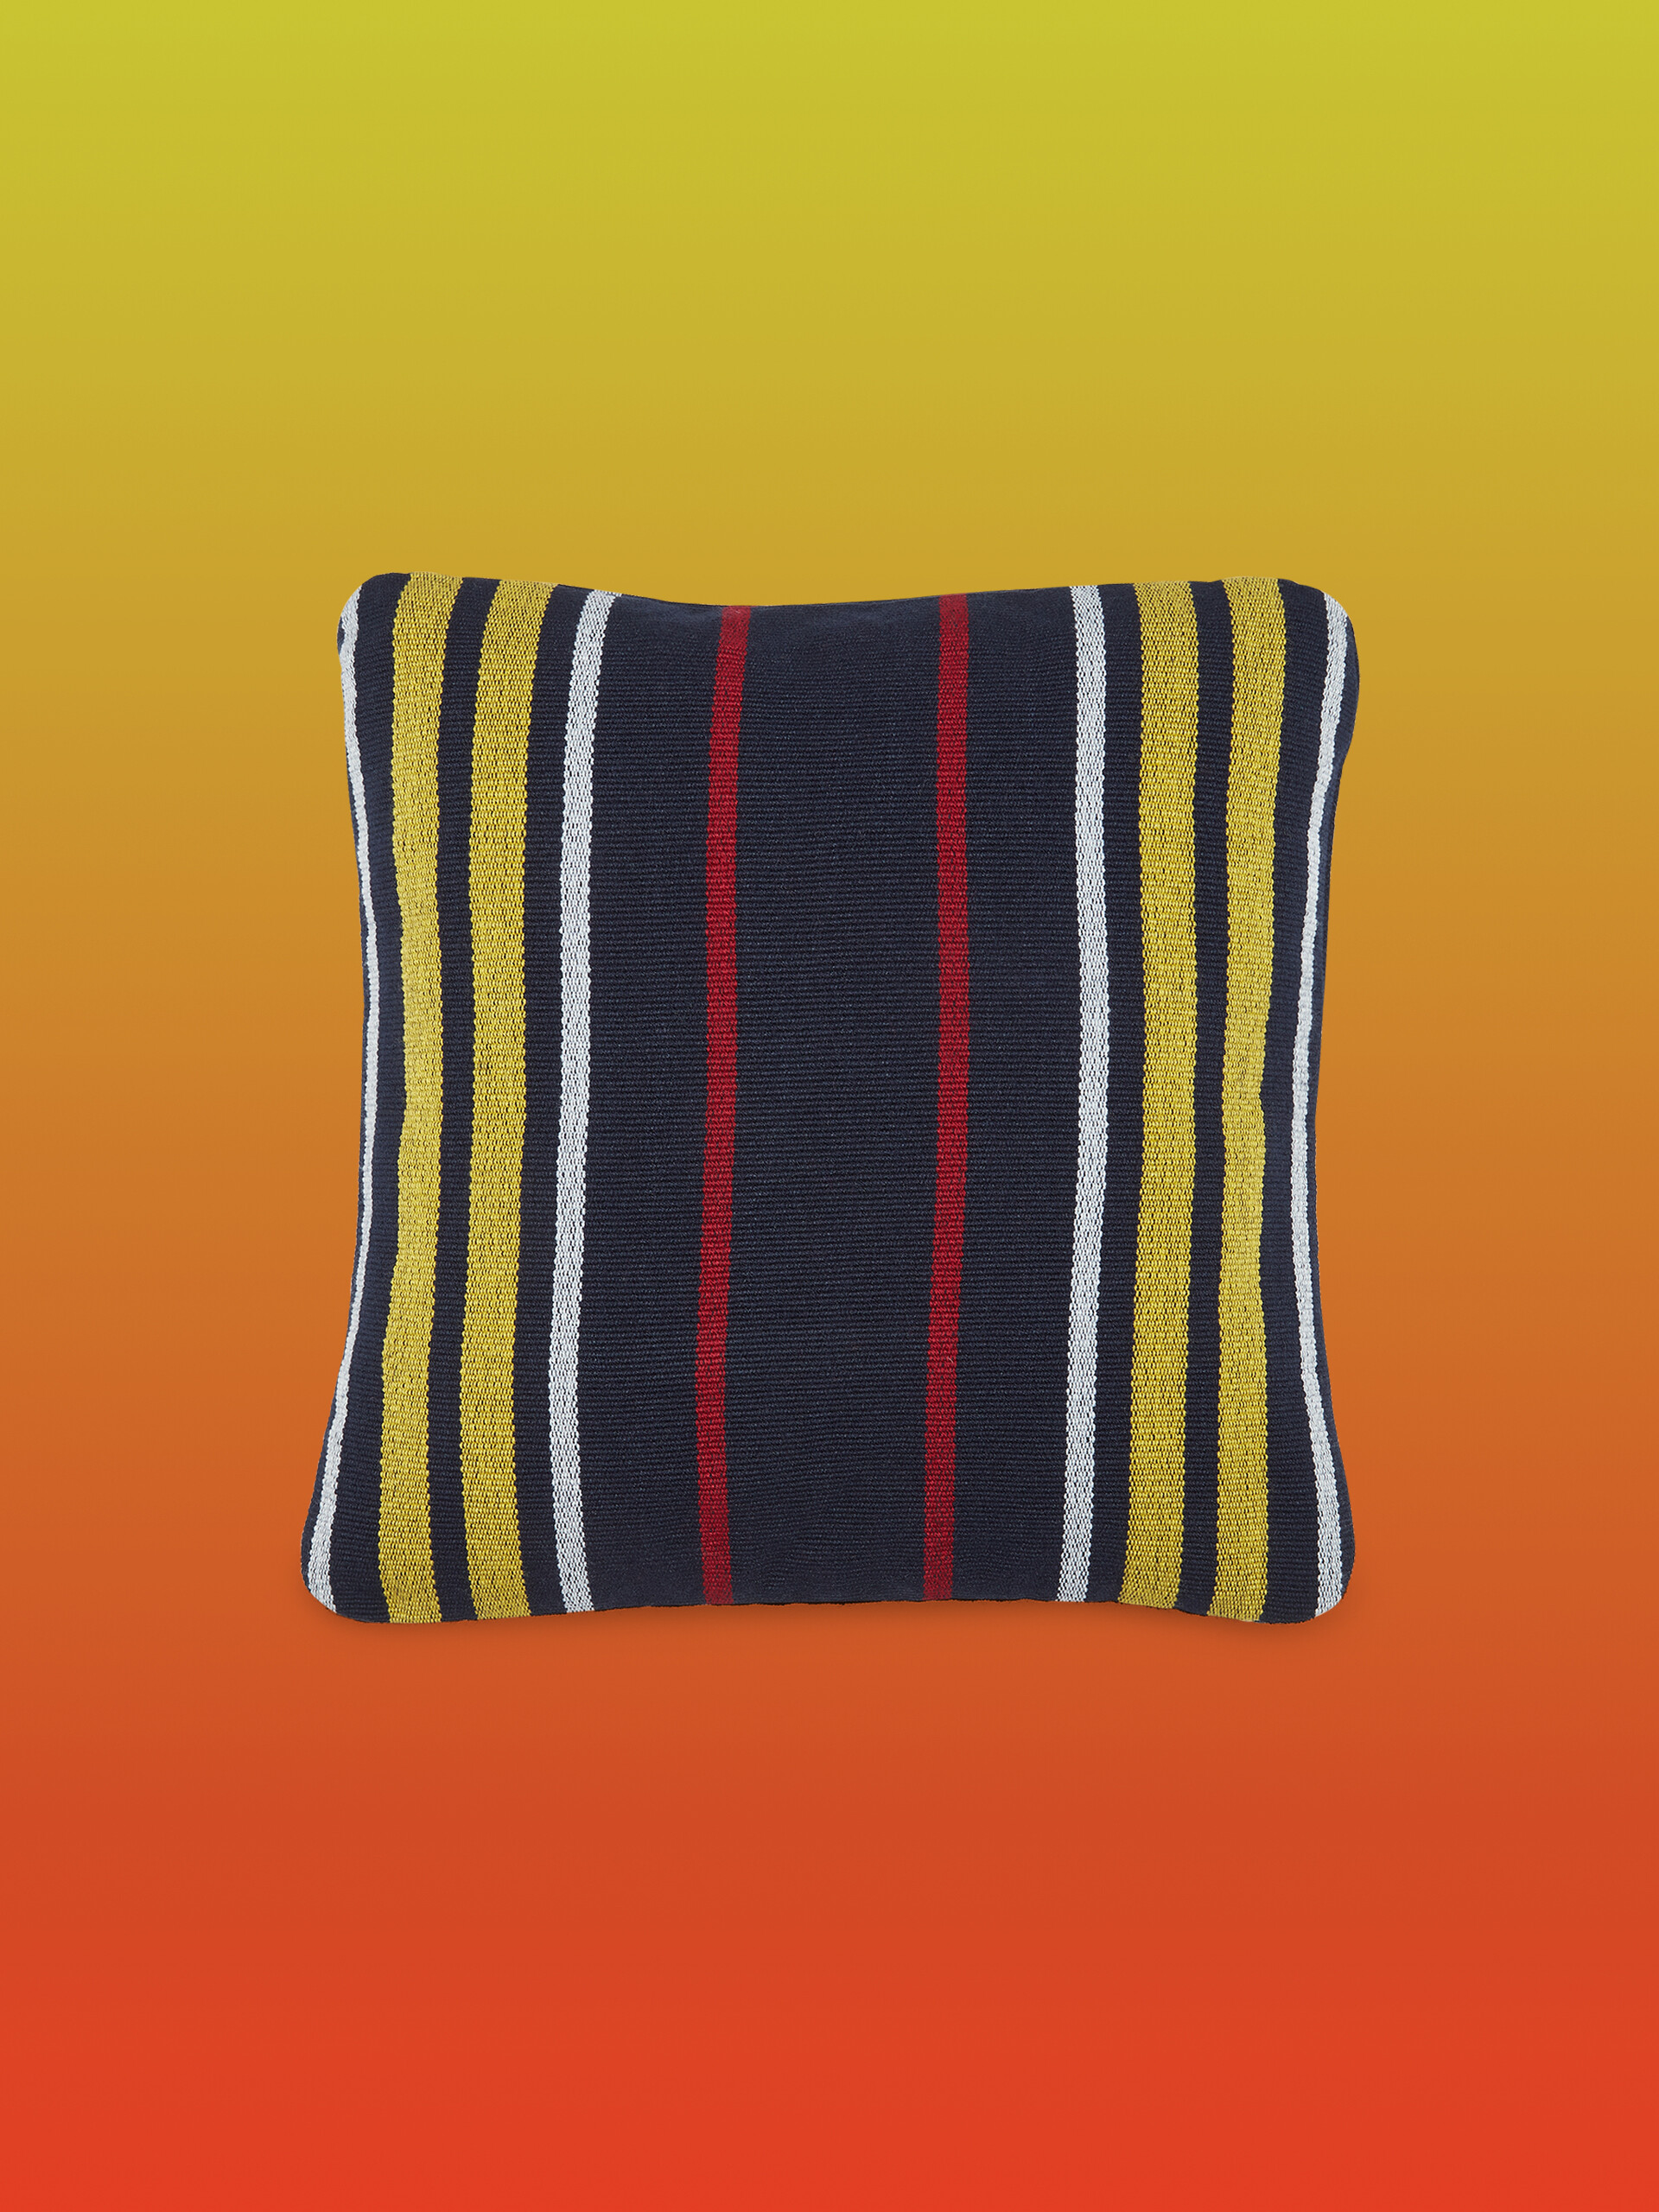 MARNI MARKET square pillow cover in polyester with black yellow and red vertical stripes - Furniture - Image 1